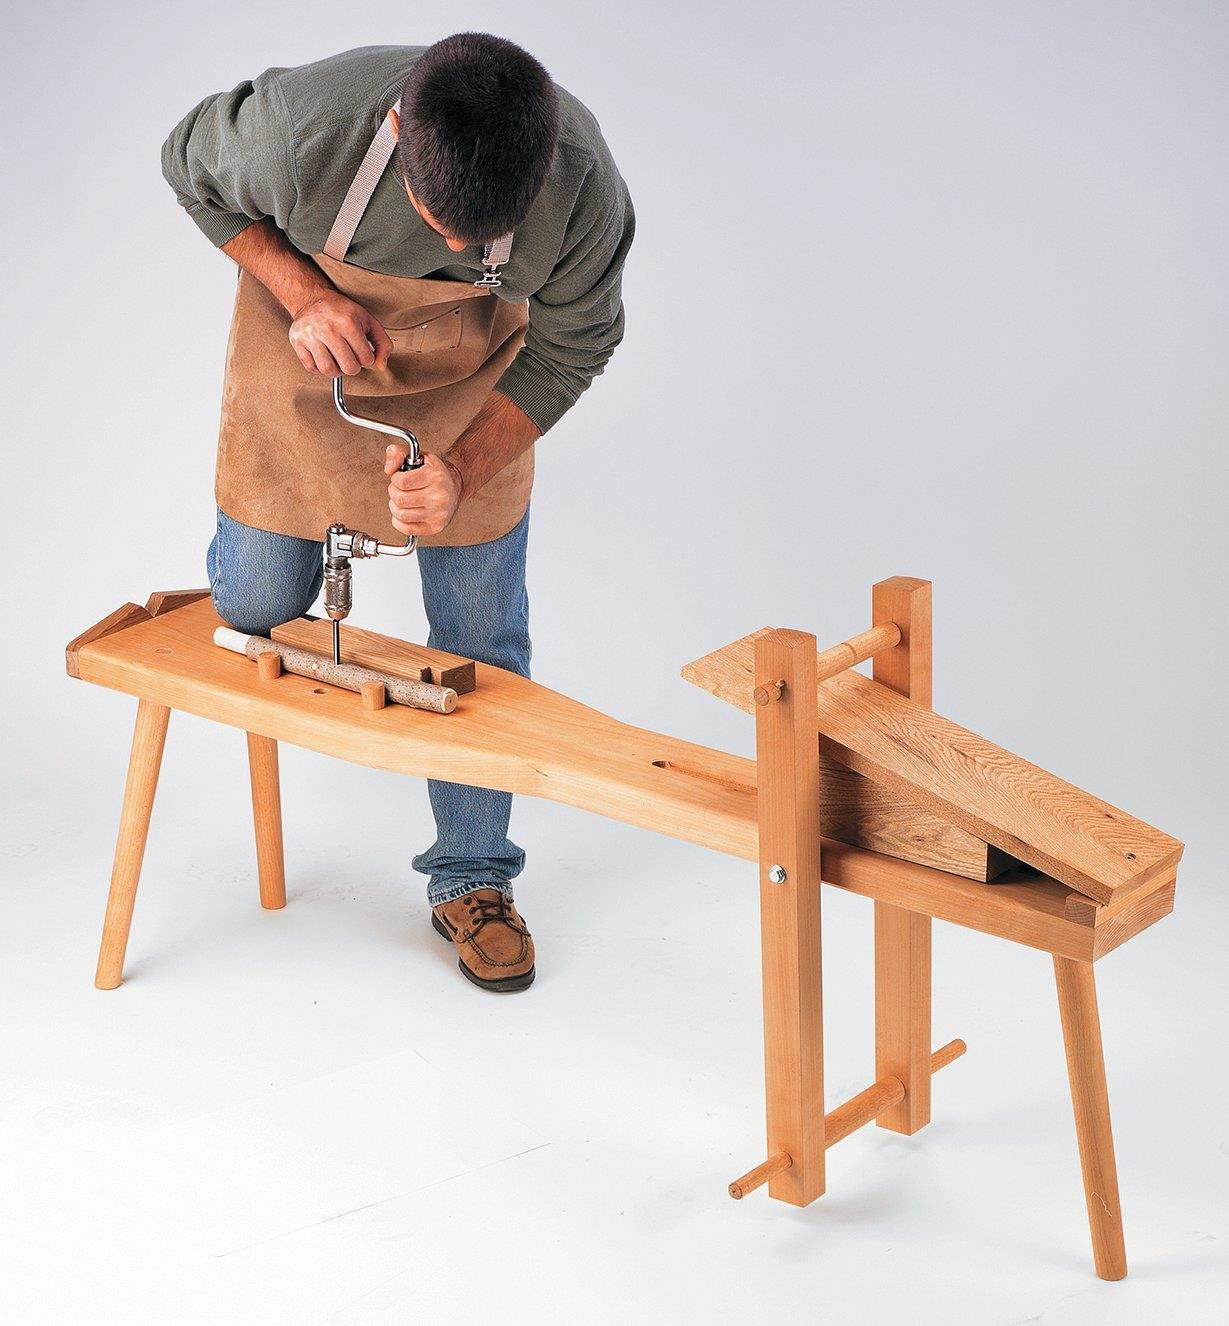 A man kneeling on a shaving horse uses a hand drill to bore a hole in a workpiece